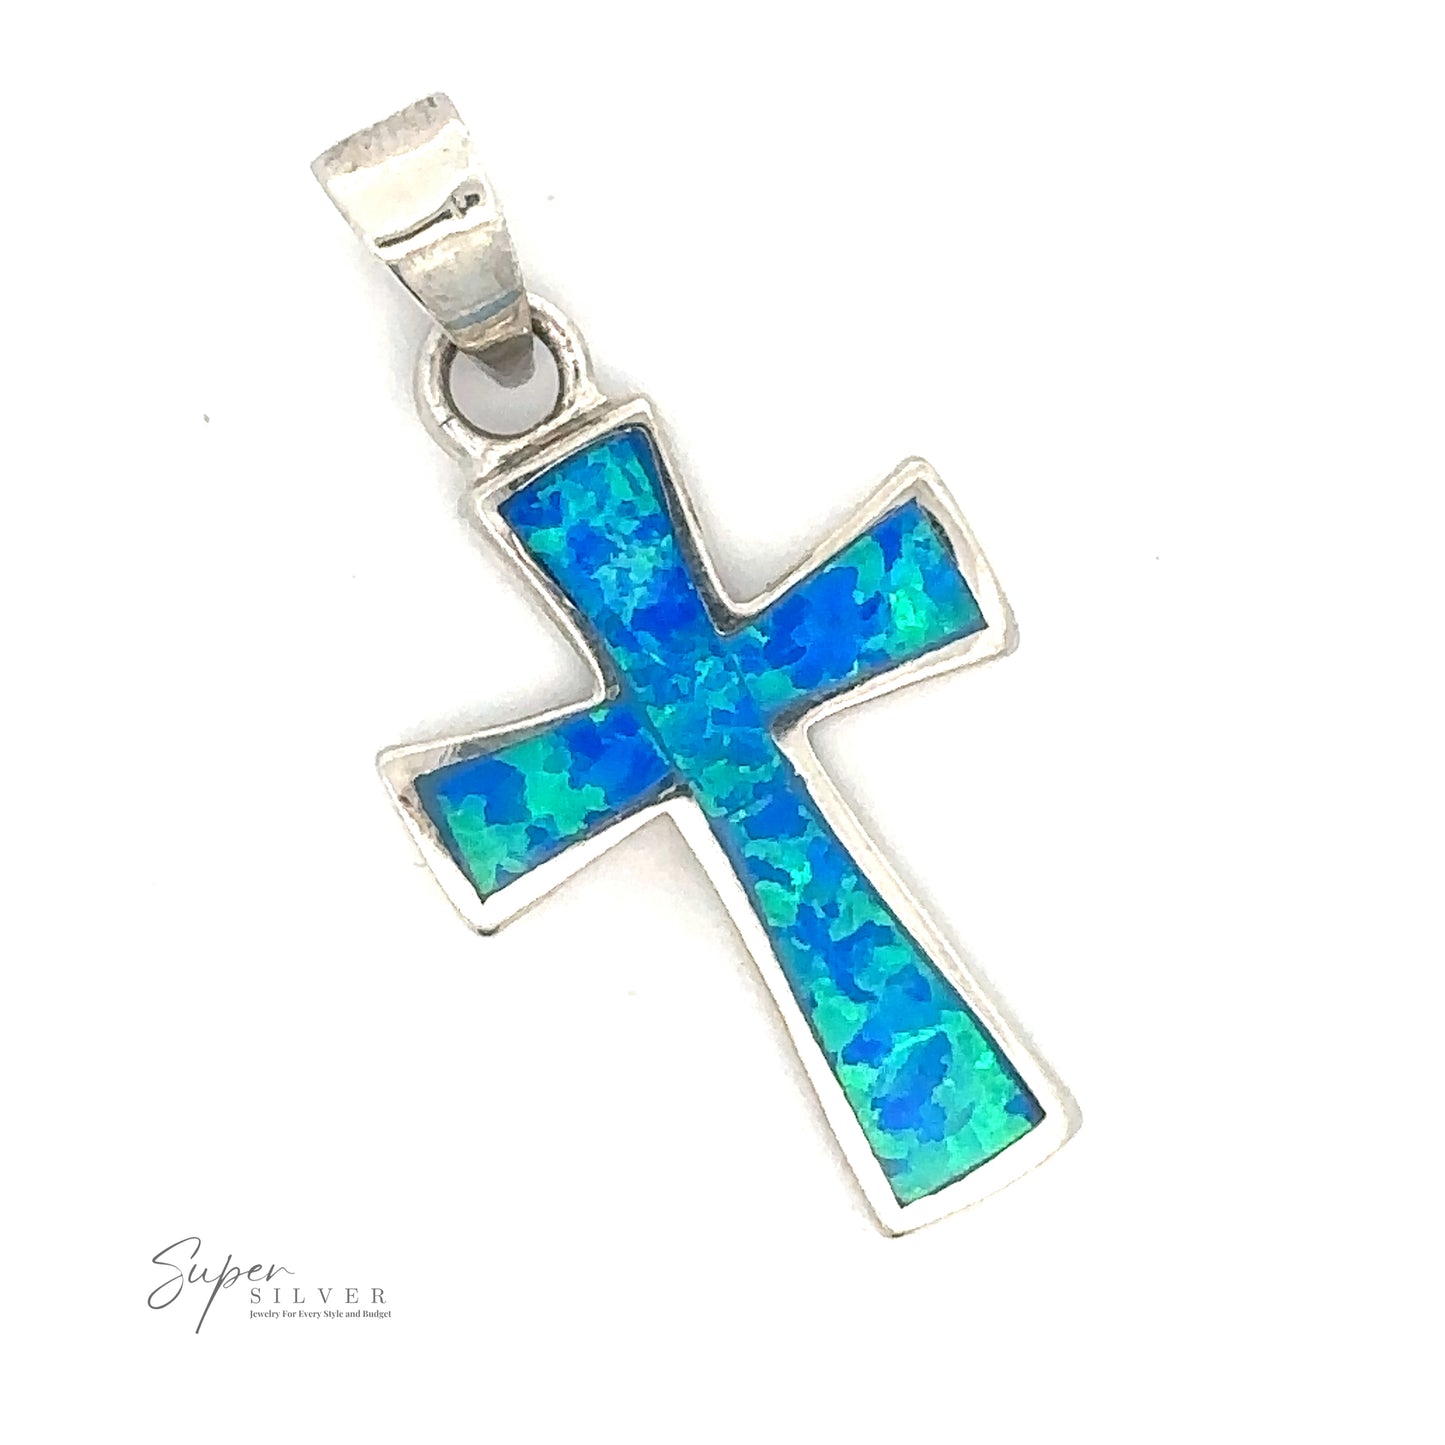 
                  
                    An Opal Cross Pendant with a blue and green opal inlay, featuring a bail for a chain. The logo "Super Silver" is visible in the bottom left corner, enhanced by a sleek rhodium finish.
                  
                